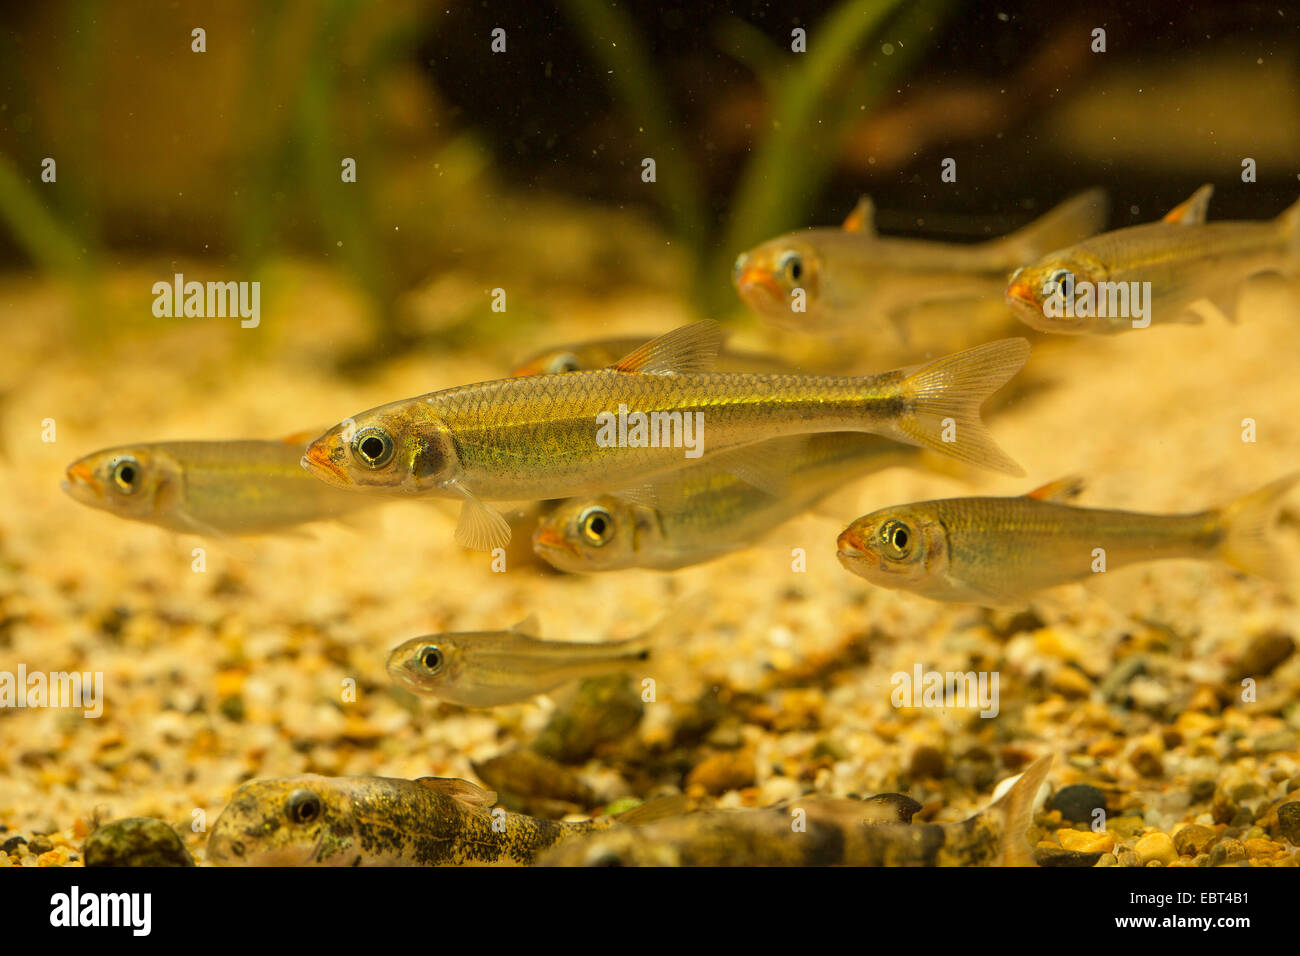 warpaint shiner  (Luxilus coccogenis), swimming young fishes, side view Stock Photo